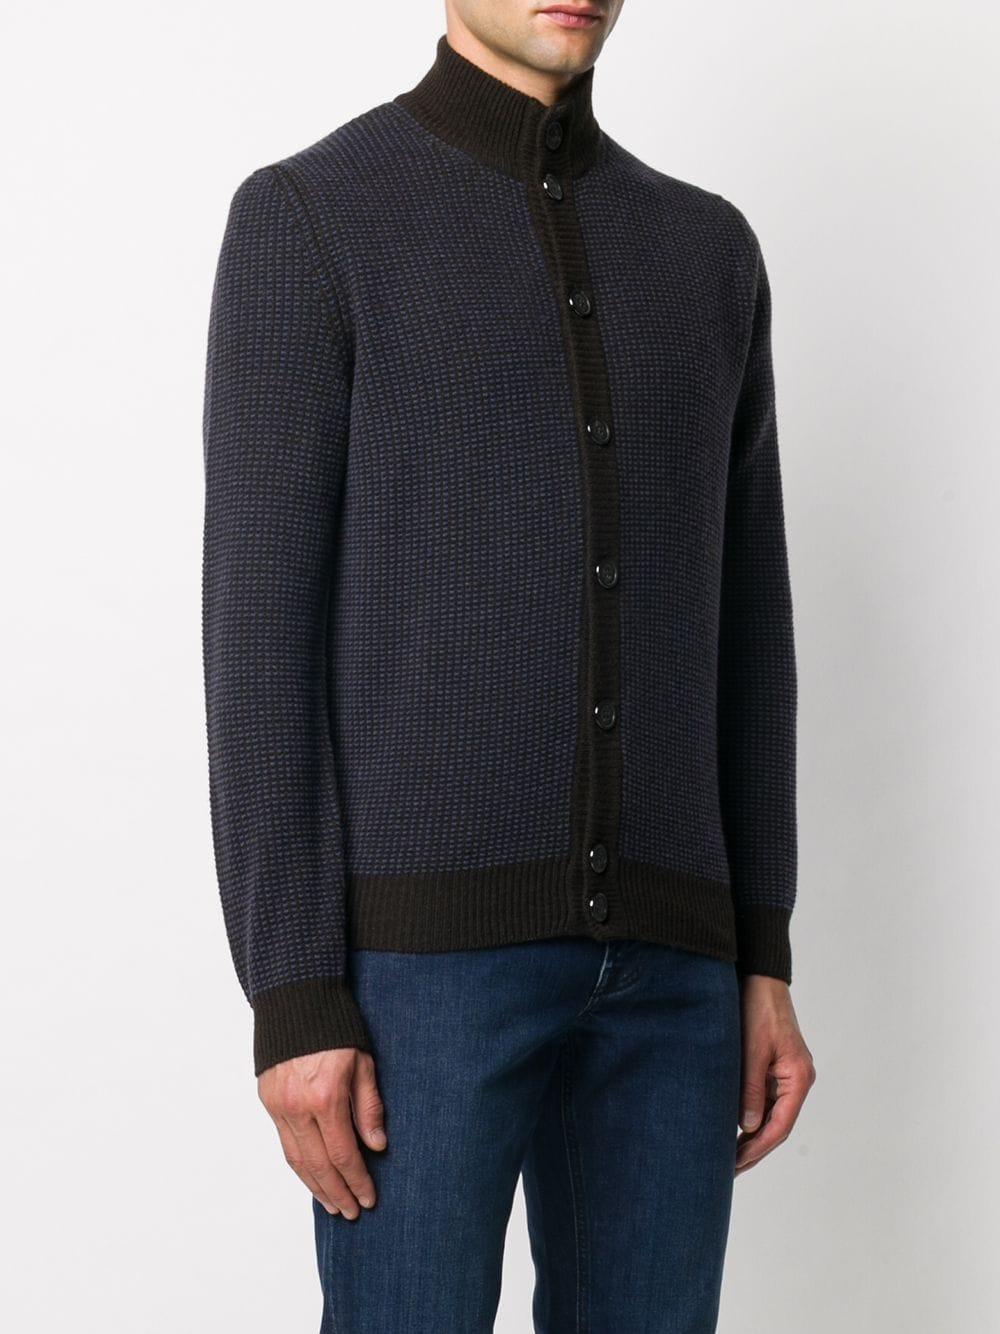 Corneliani Textured Button-up Cardigan in Blue for Men - Lyst